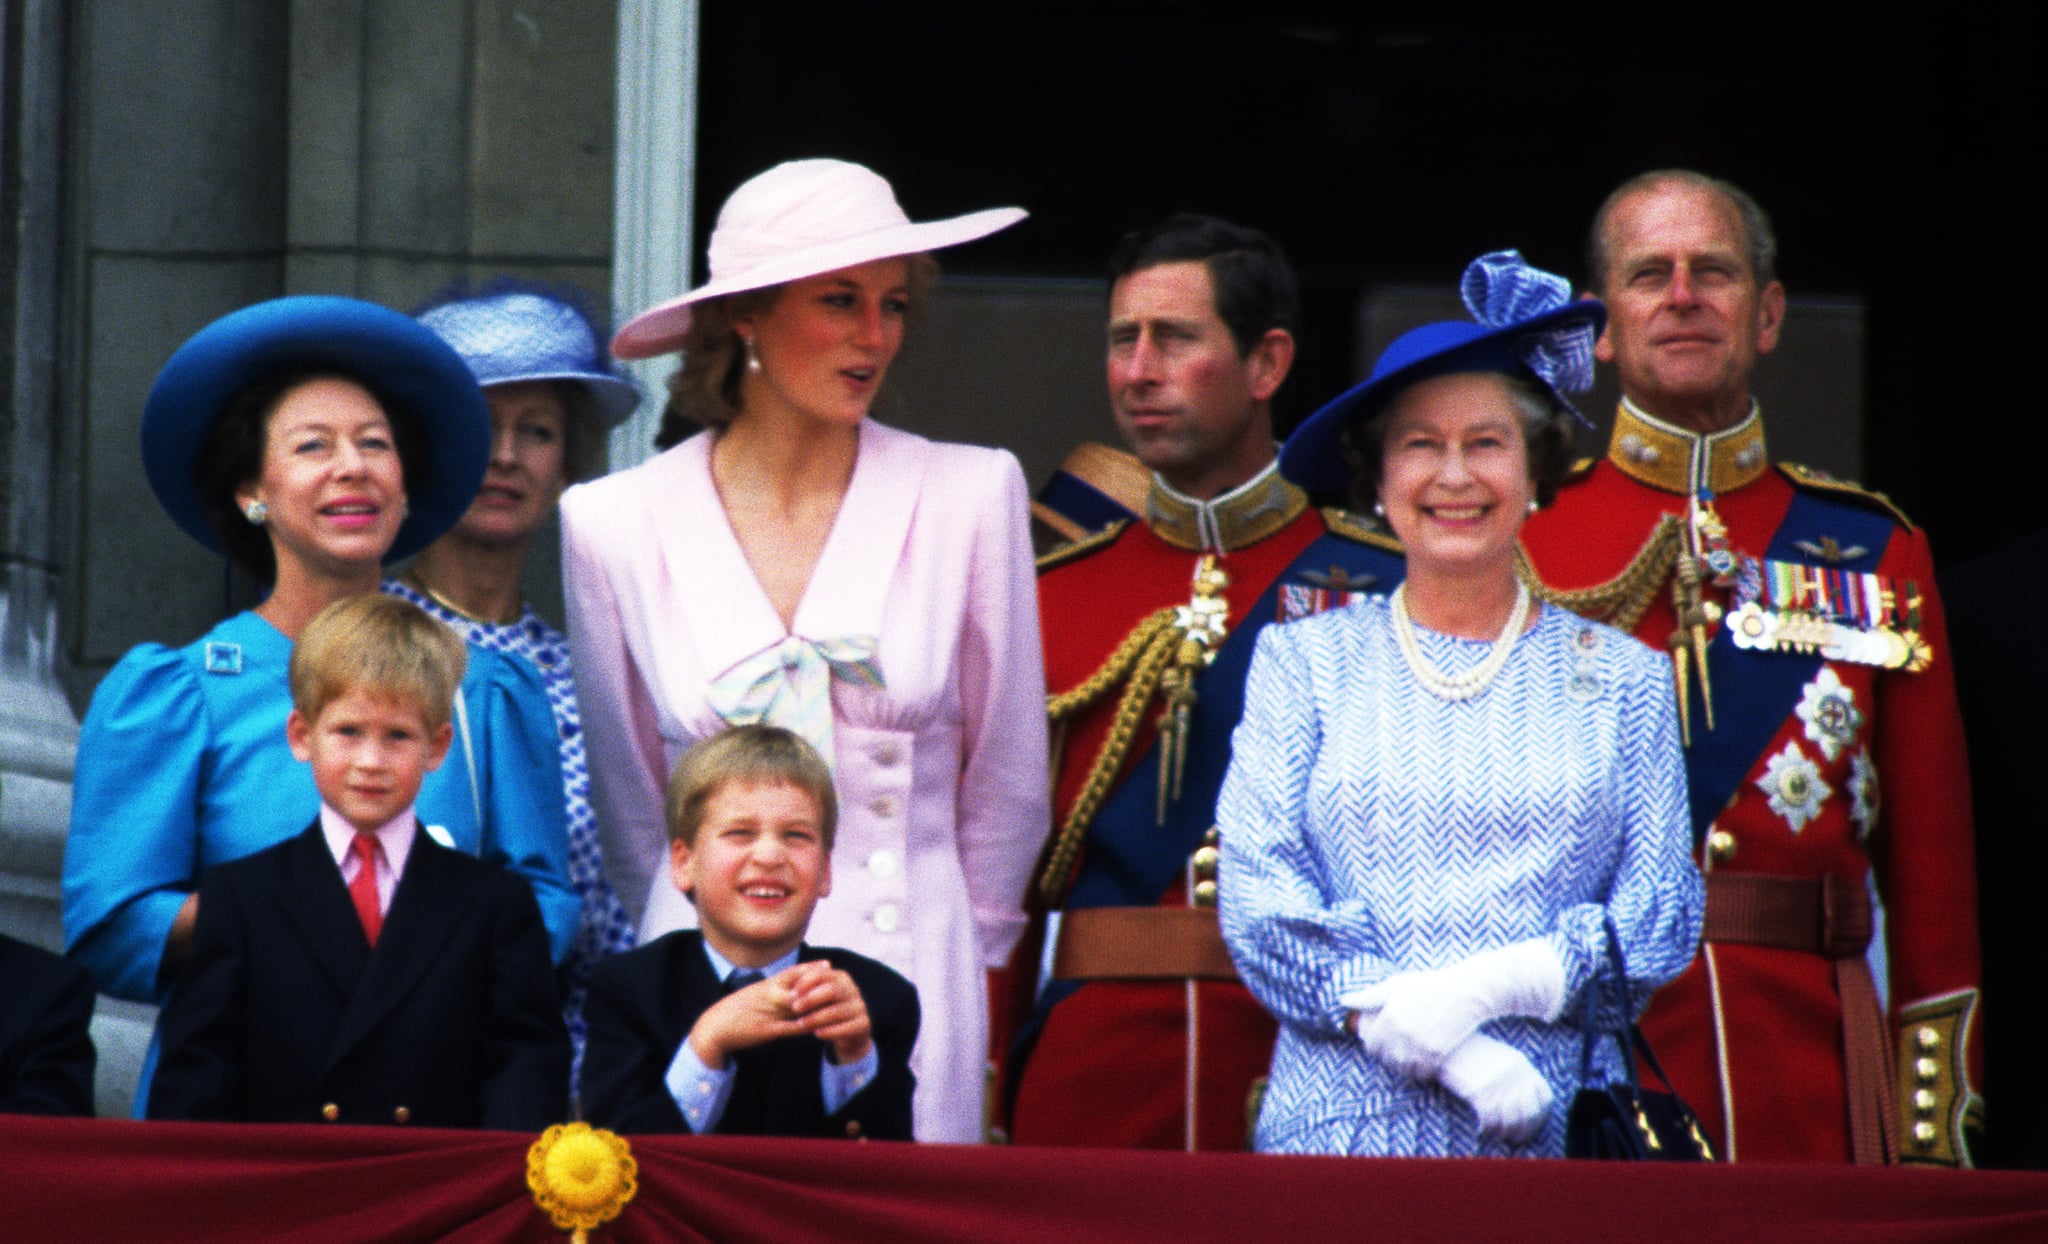 Queen Elizabeth II with her family at Trooping the Colour in 1989